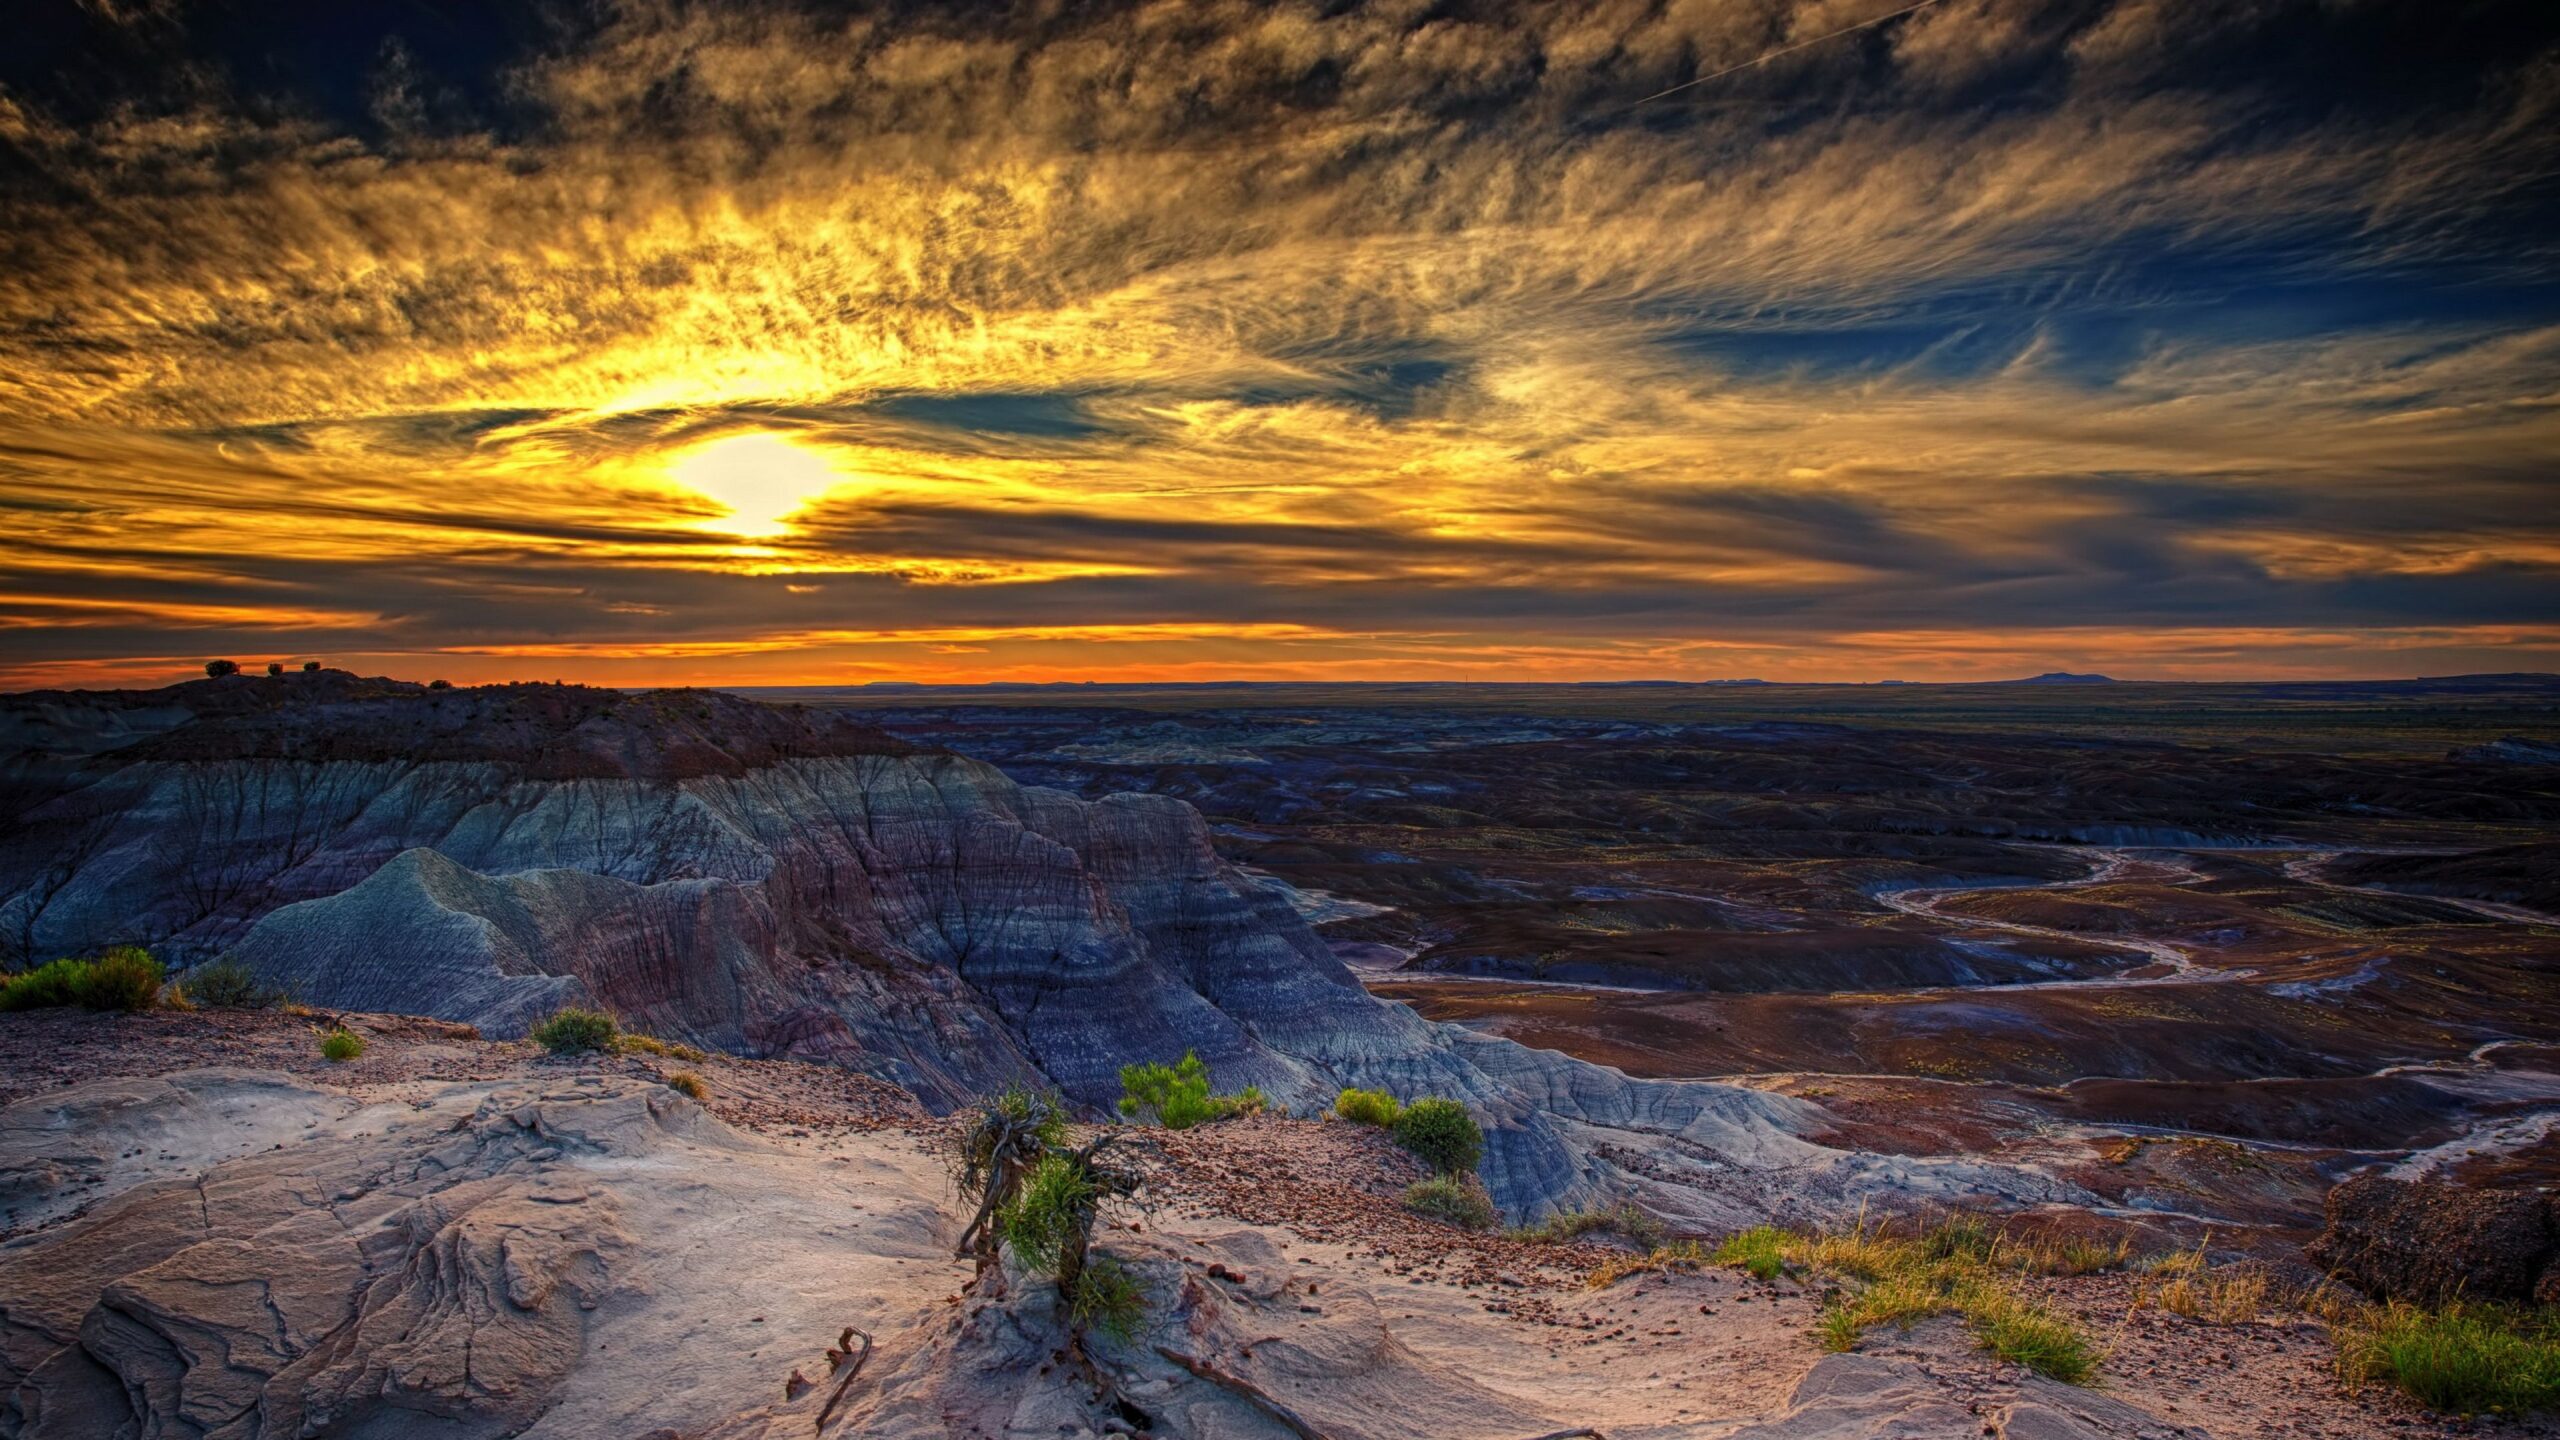 Download Wallpapers Petrified forest, Arizona, Sunset